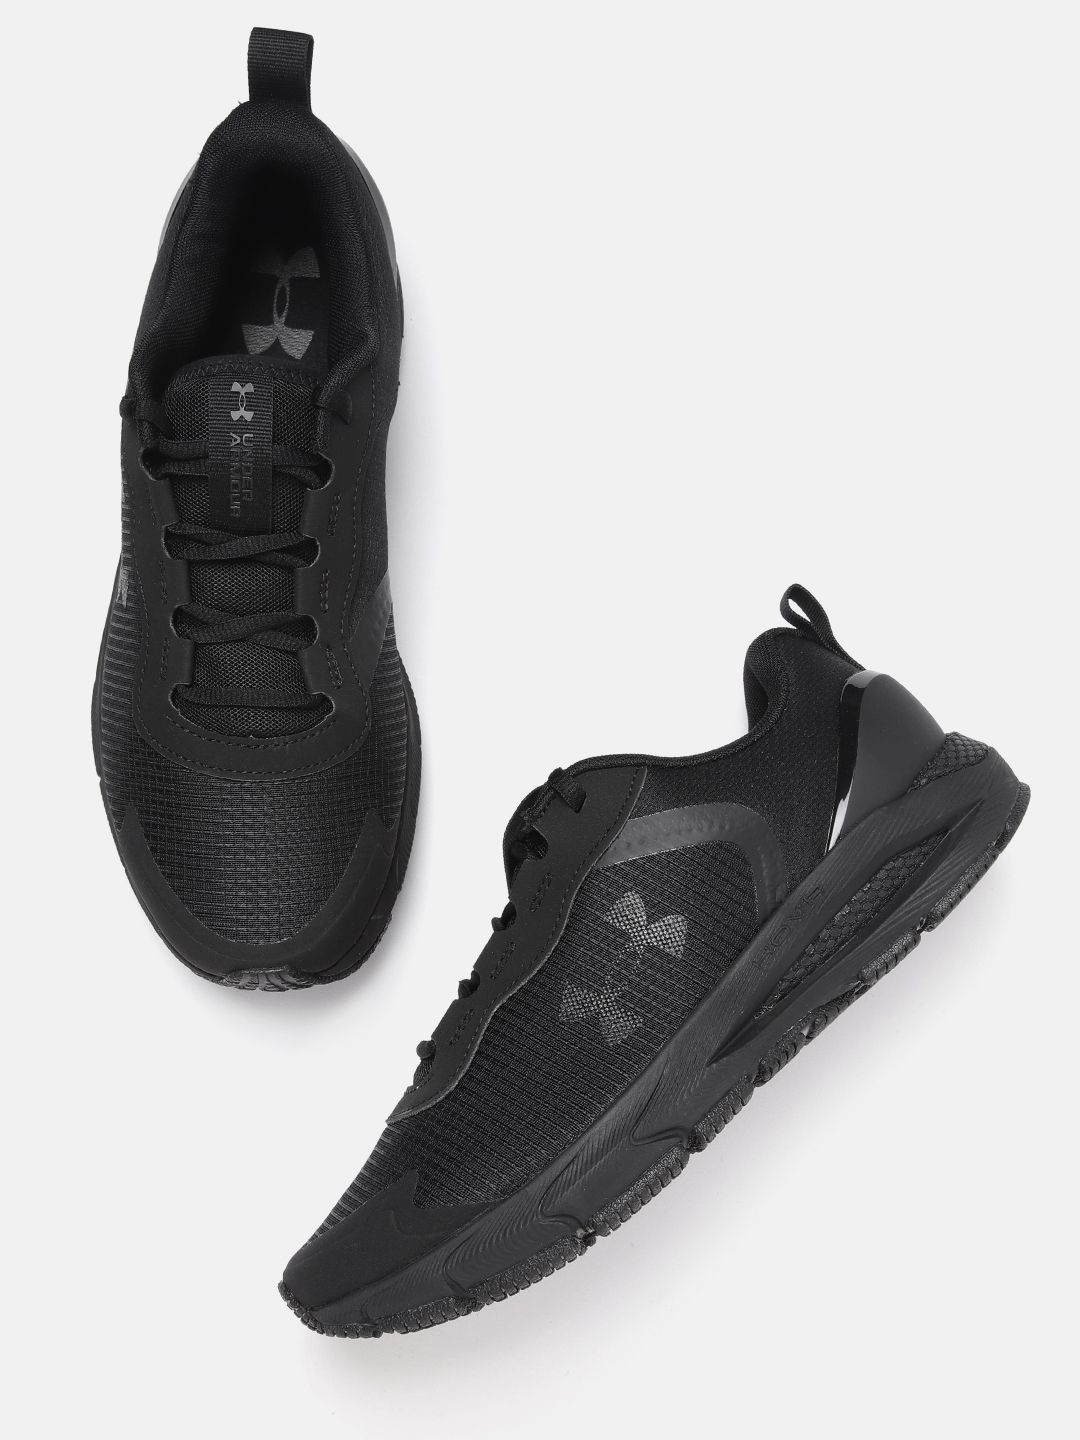 UNDER ARMOUR Women Black Woven Design Hovr Sonic SE Running Shoes Price in India